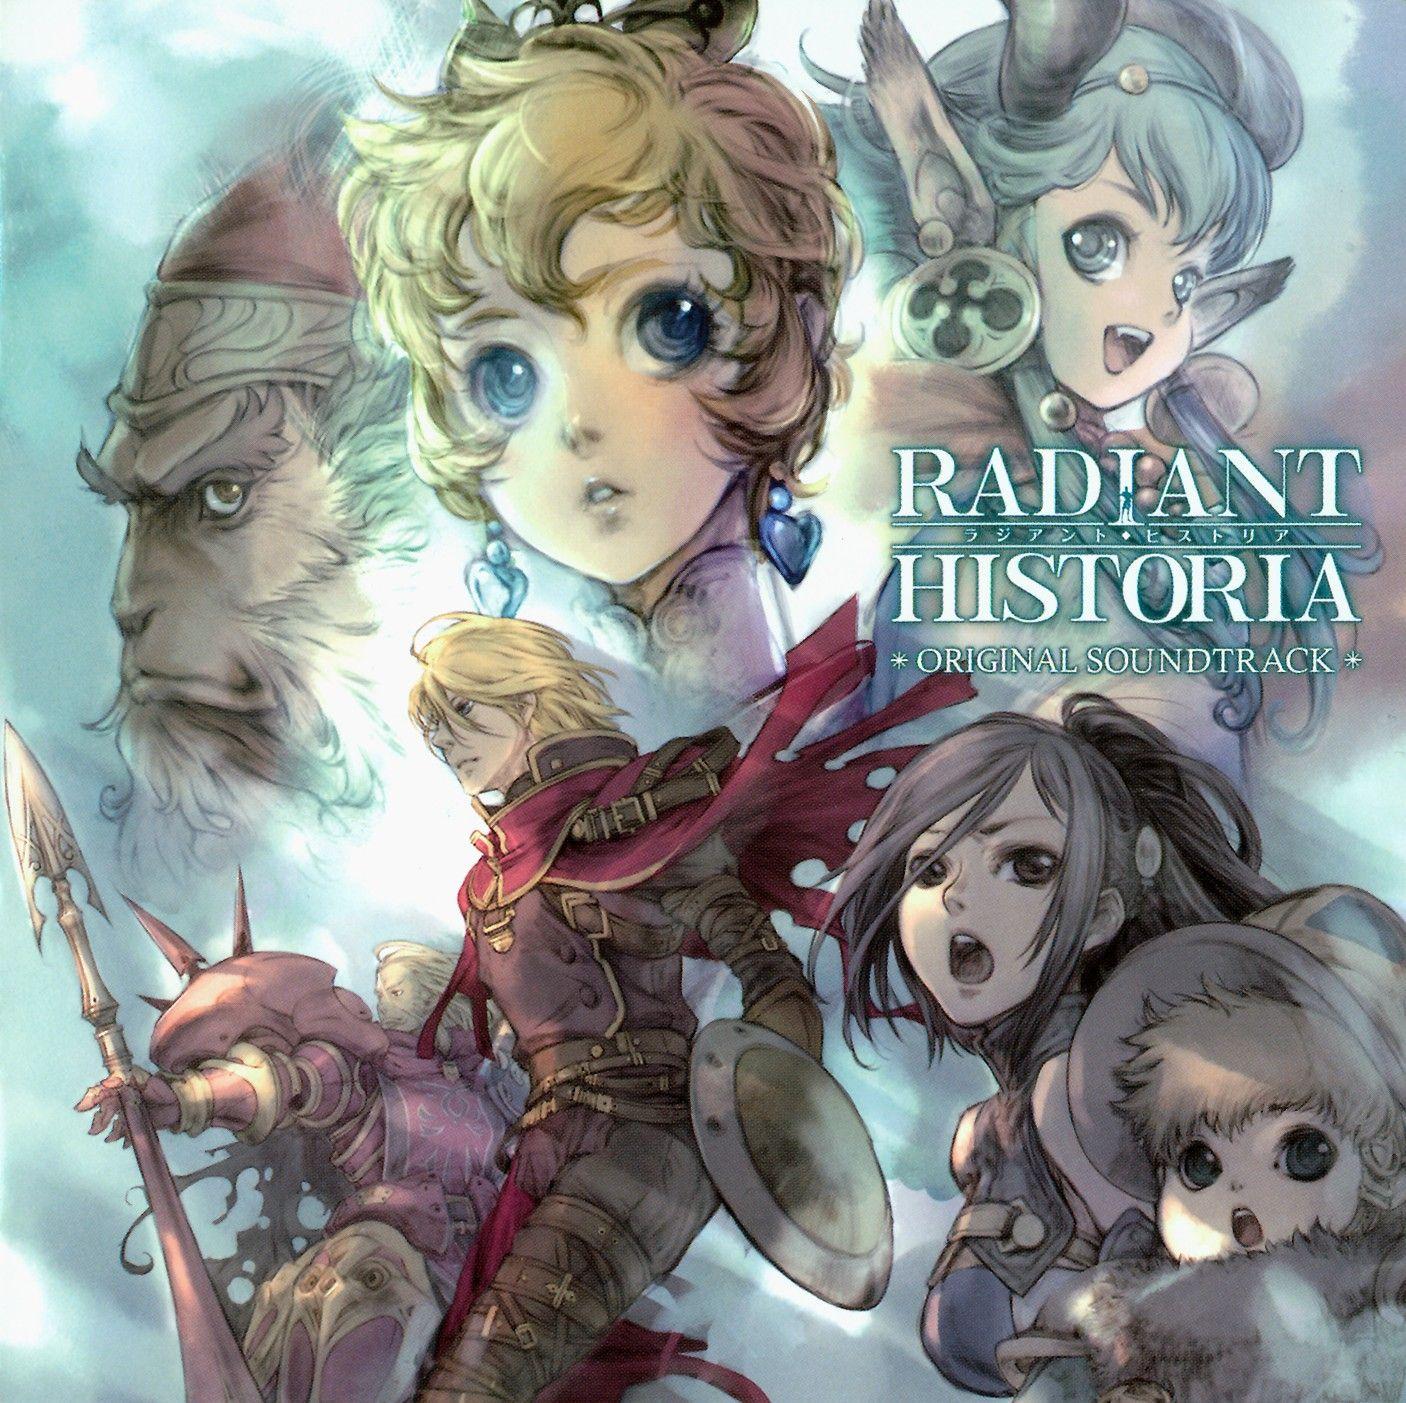 Radiant Historia and Scan Gallery